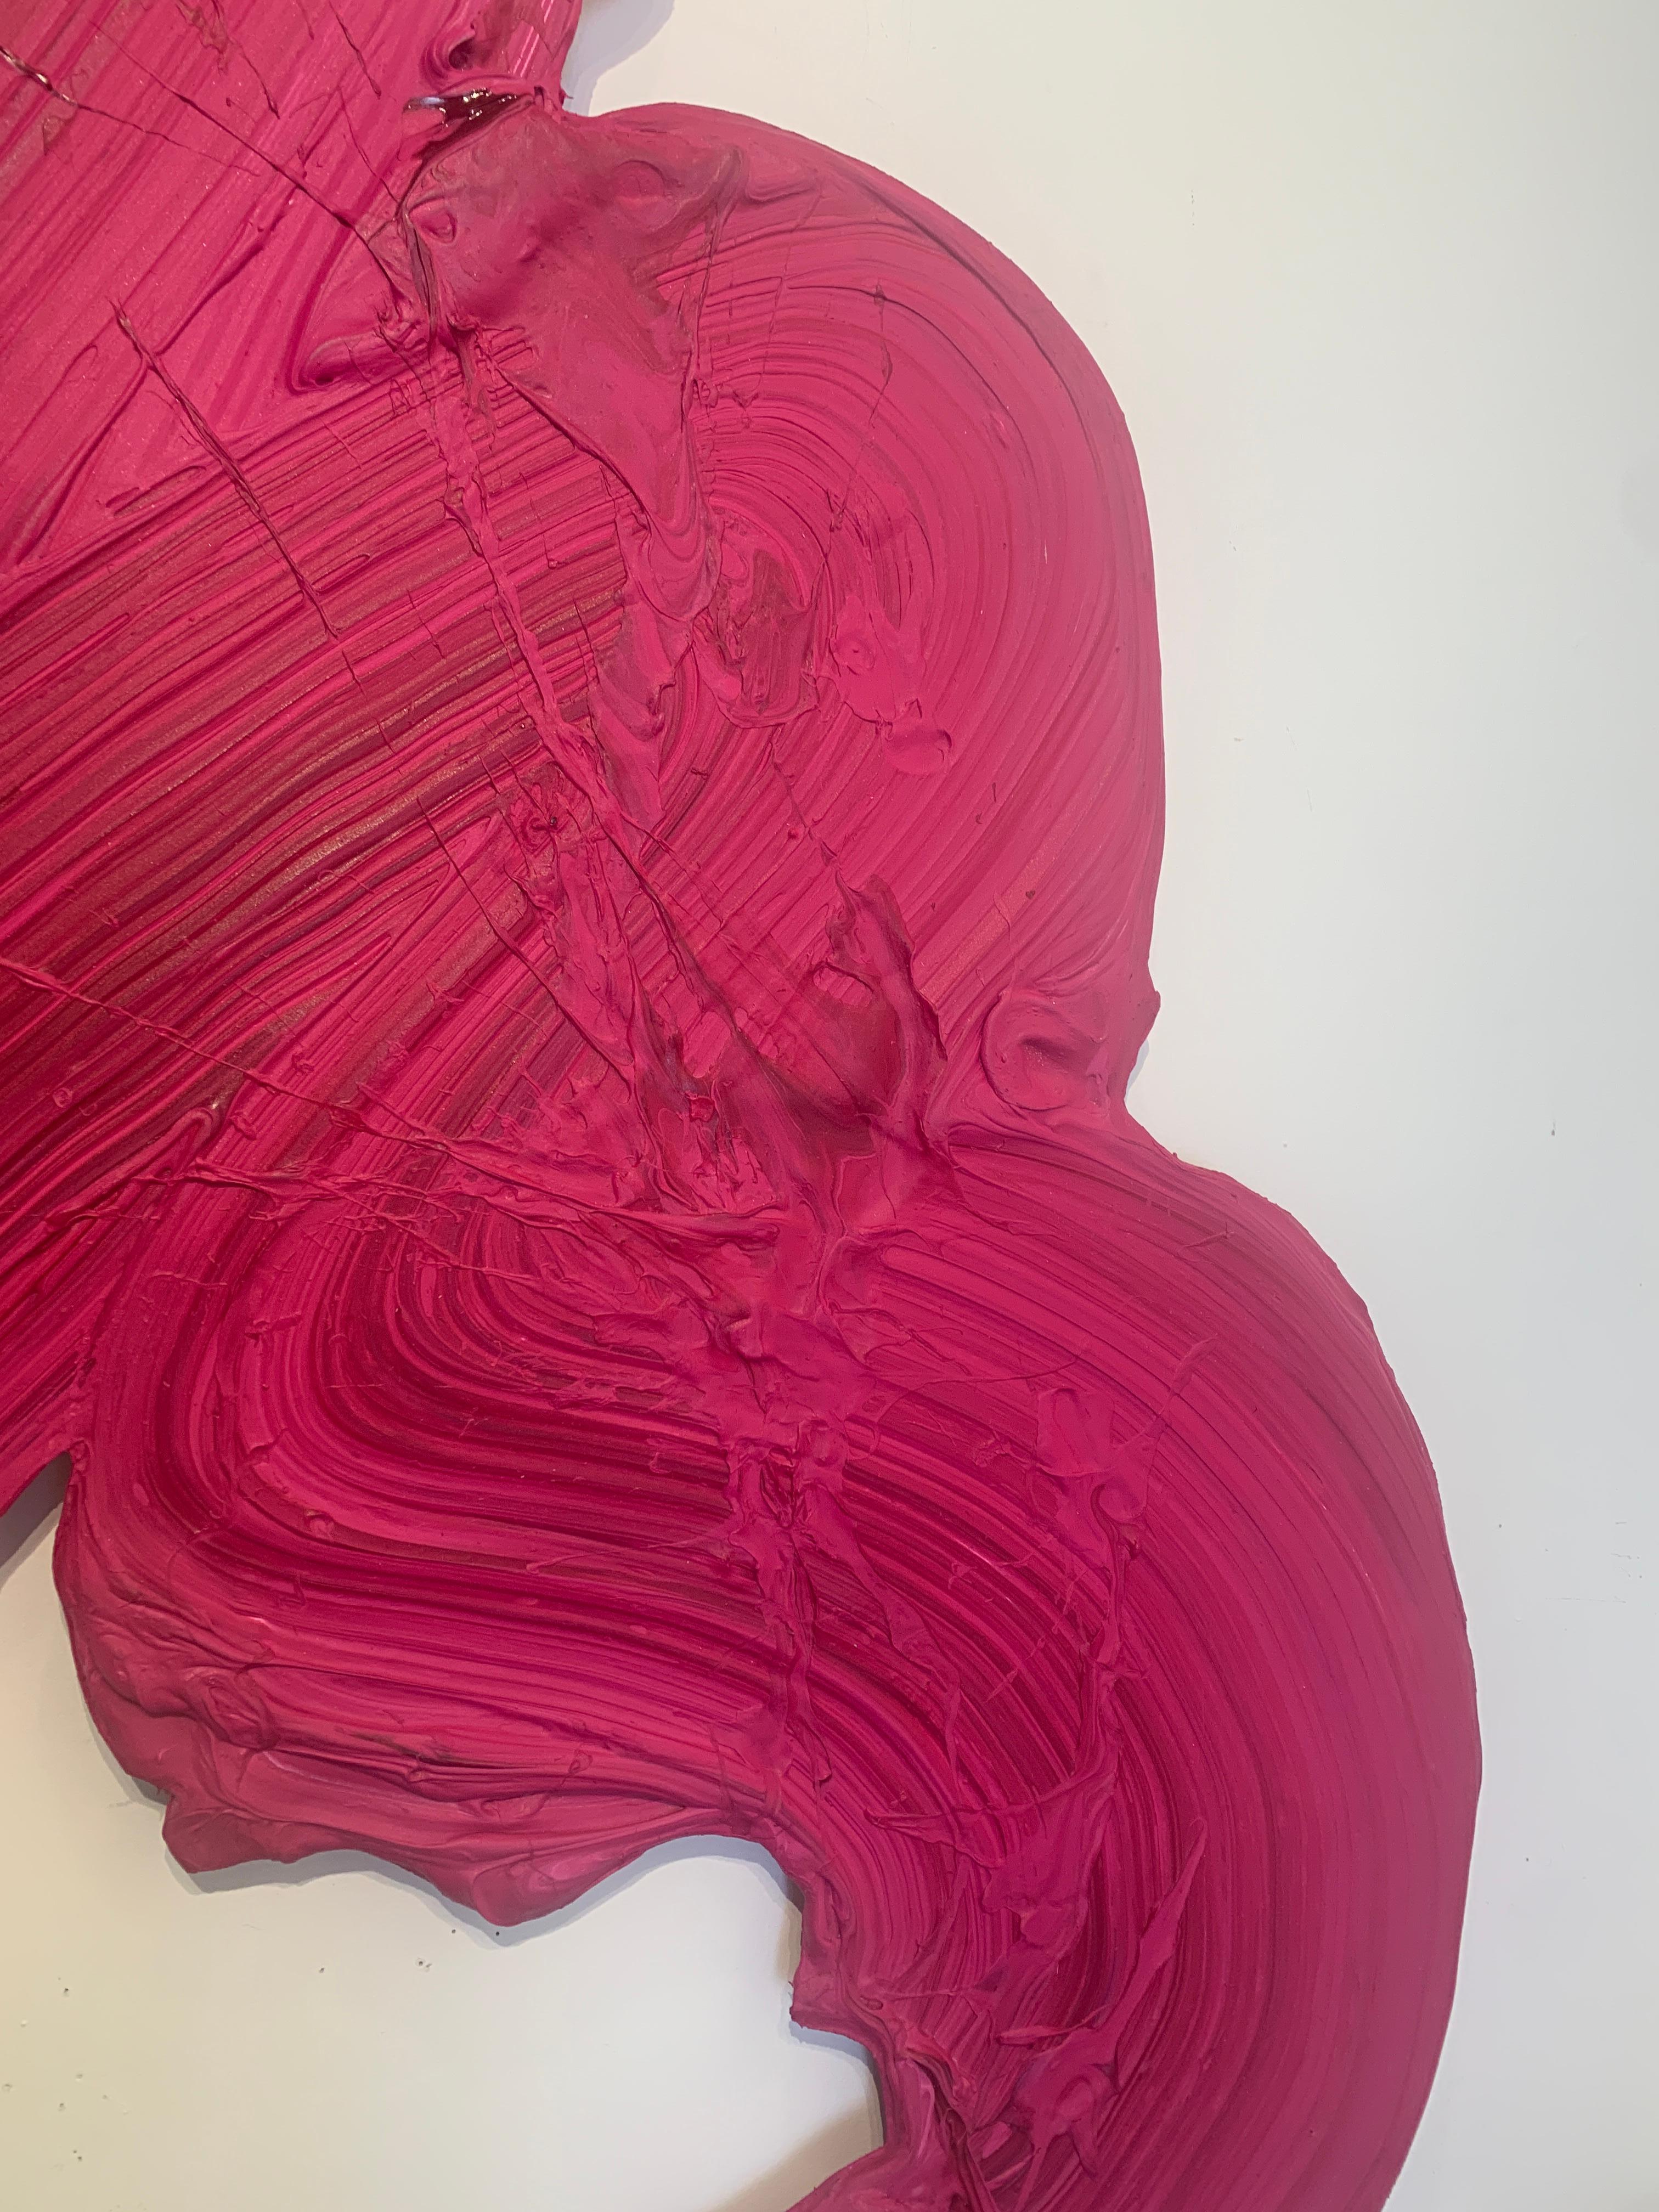 Hermia - Painting by Donald Martiny